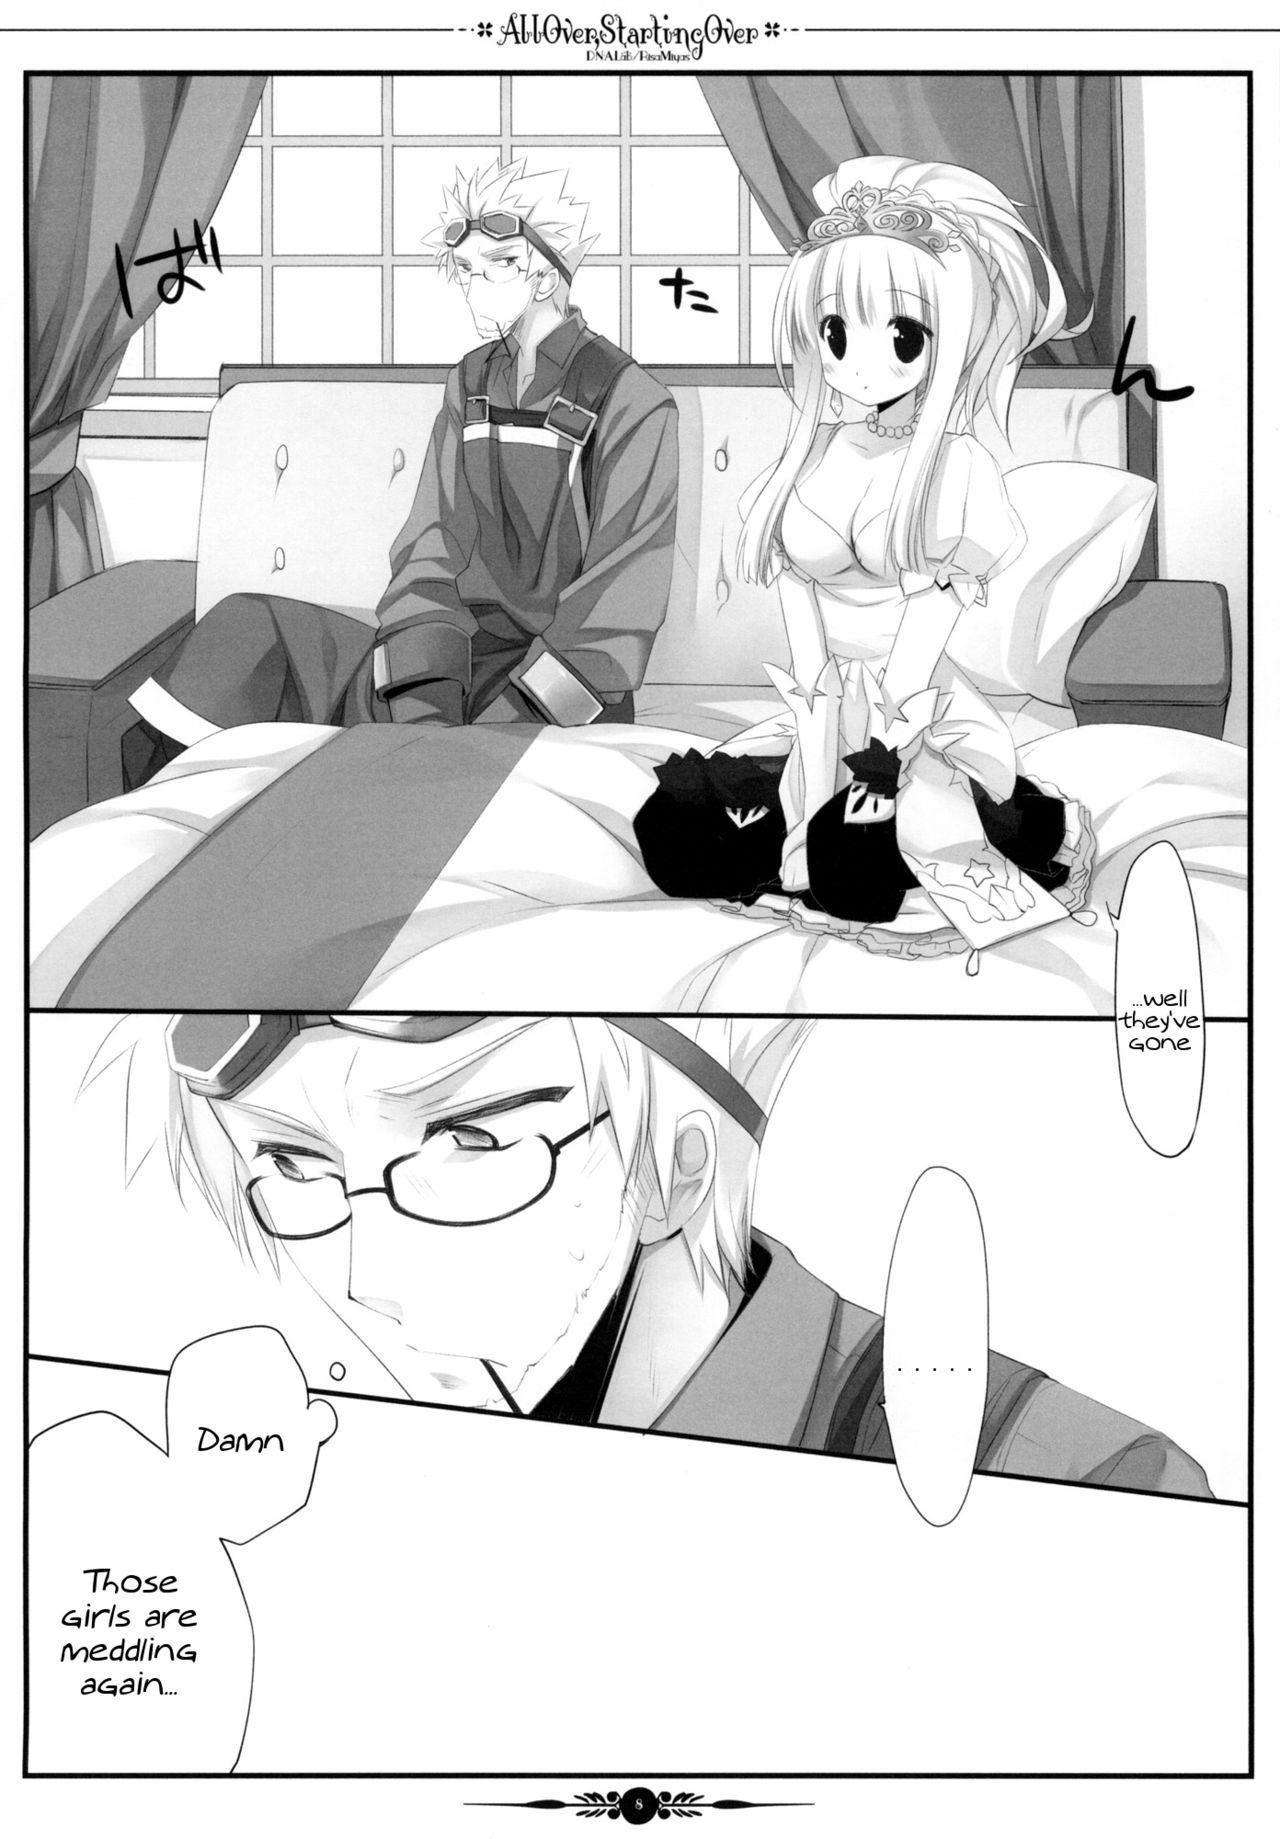 High Definition All Over, Starting Over - Etrian odyssey Asiansex - Page 7